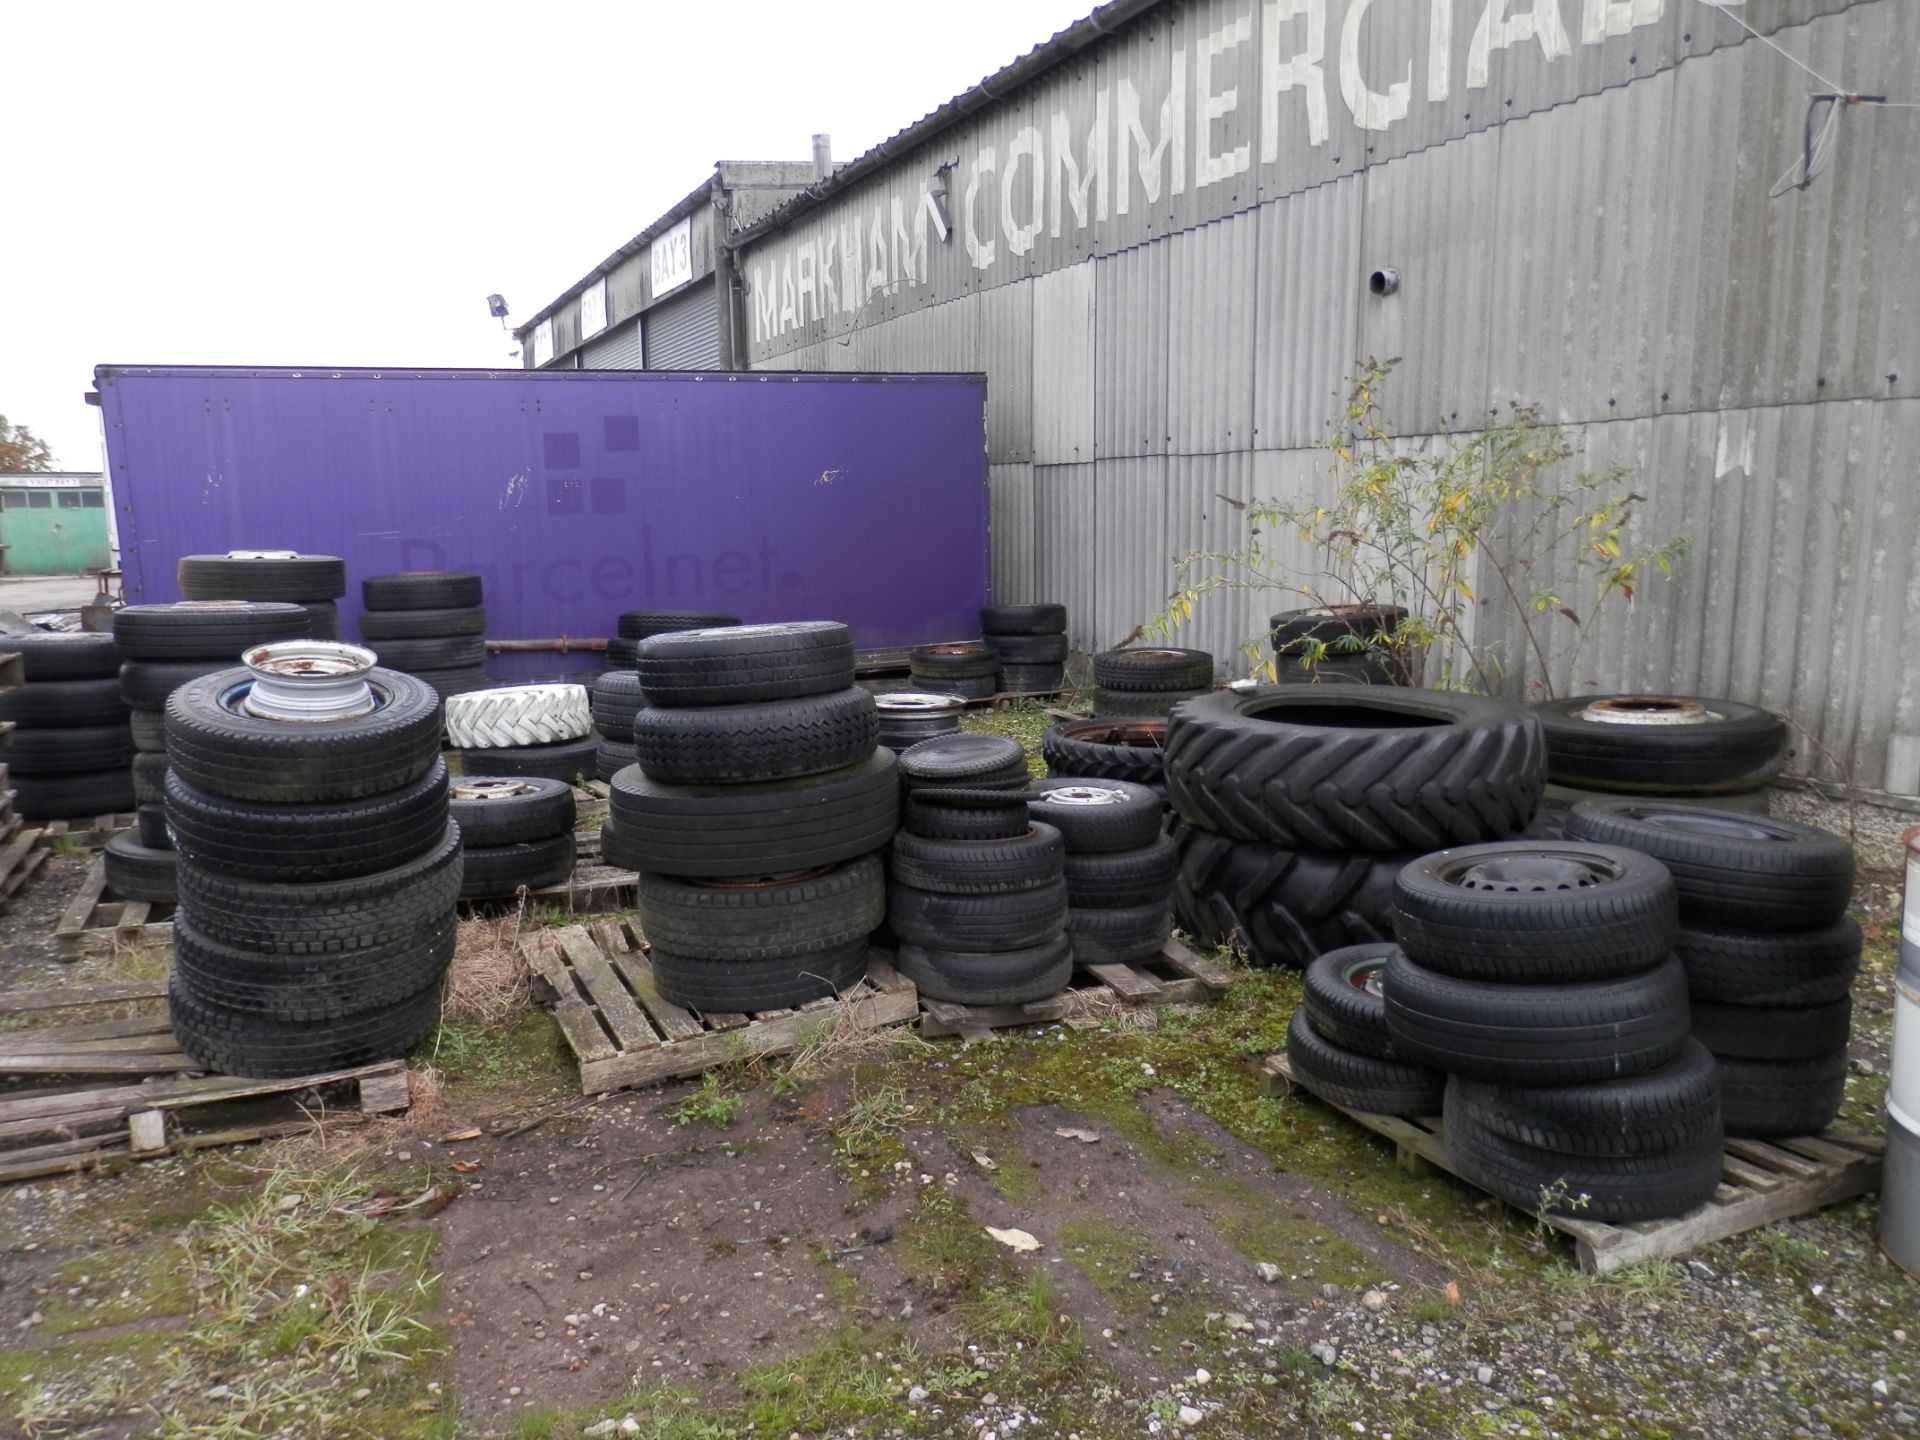 85 + ASSORTED LORRY, CAR & TRAILER TYRES & WHEELS, AS PICTURED. BUYER TO COLLECT COMPLETE JOBLOT.